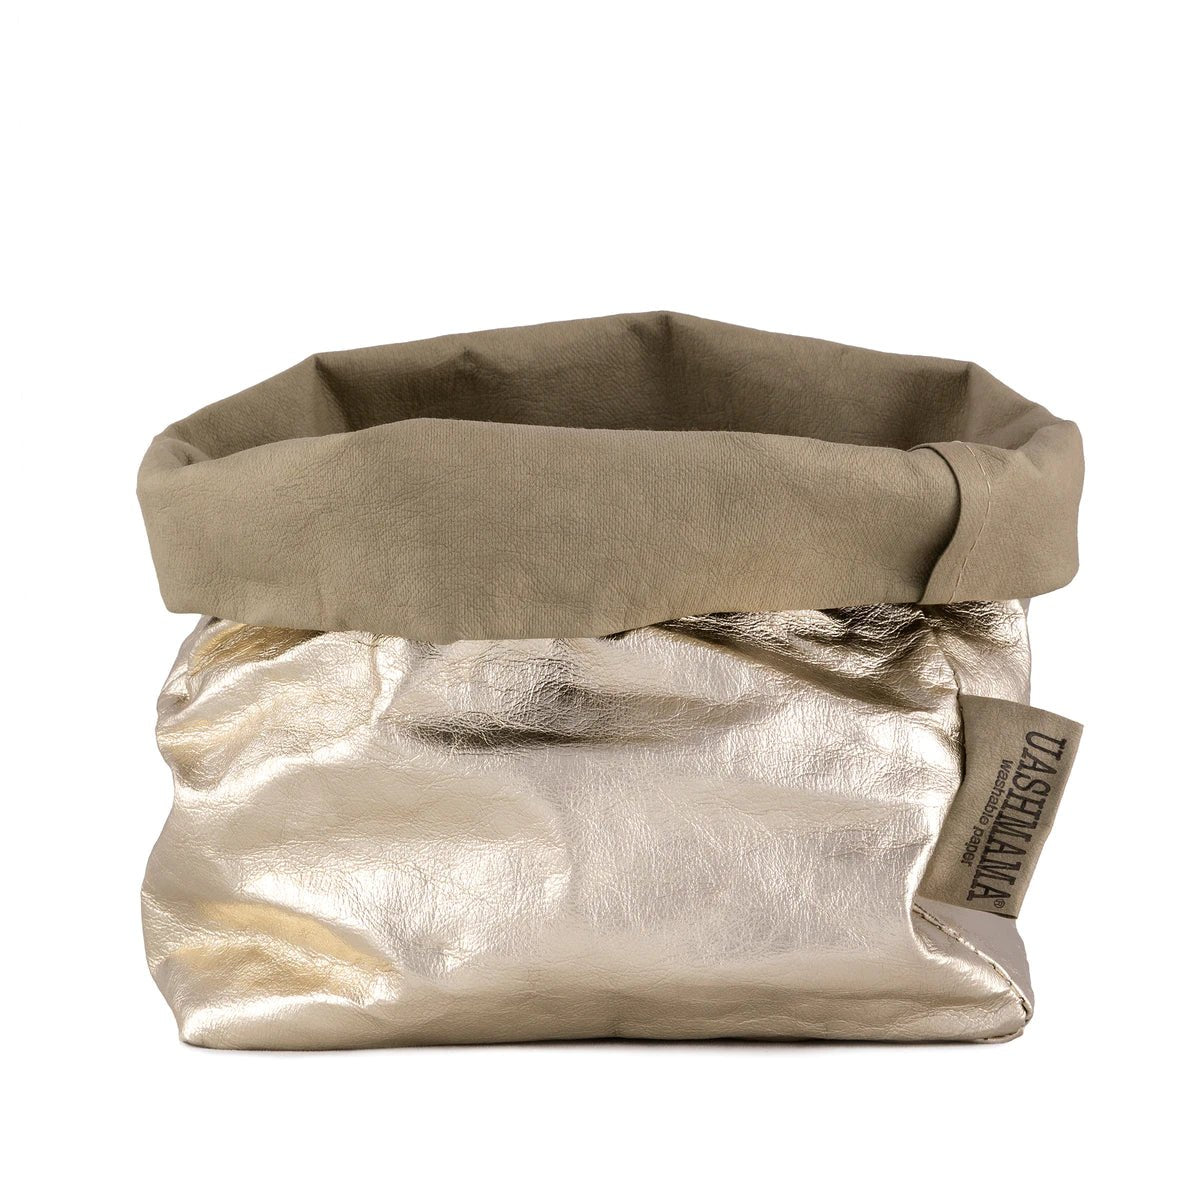 A washable paper bag is shown. The bag is rolled down at the top and features a UASHMAMA logo label on the bottom left corner. The bag pictured is the medium size in metallic platinum.